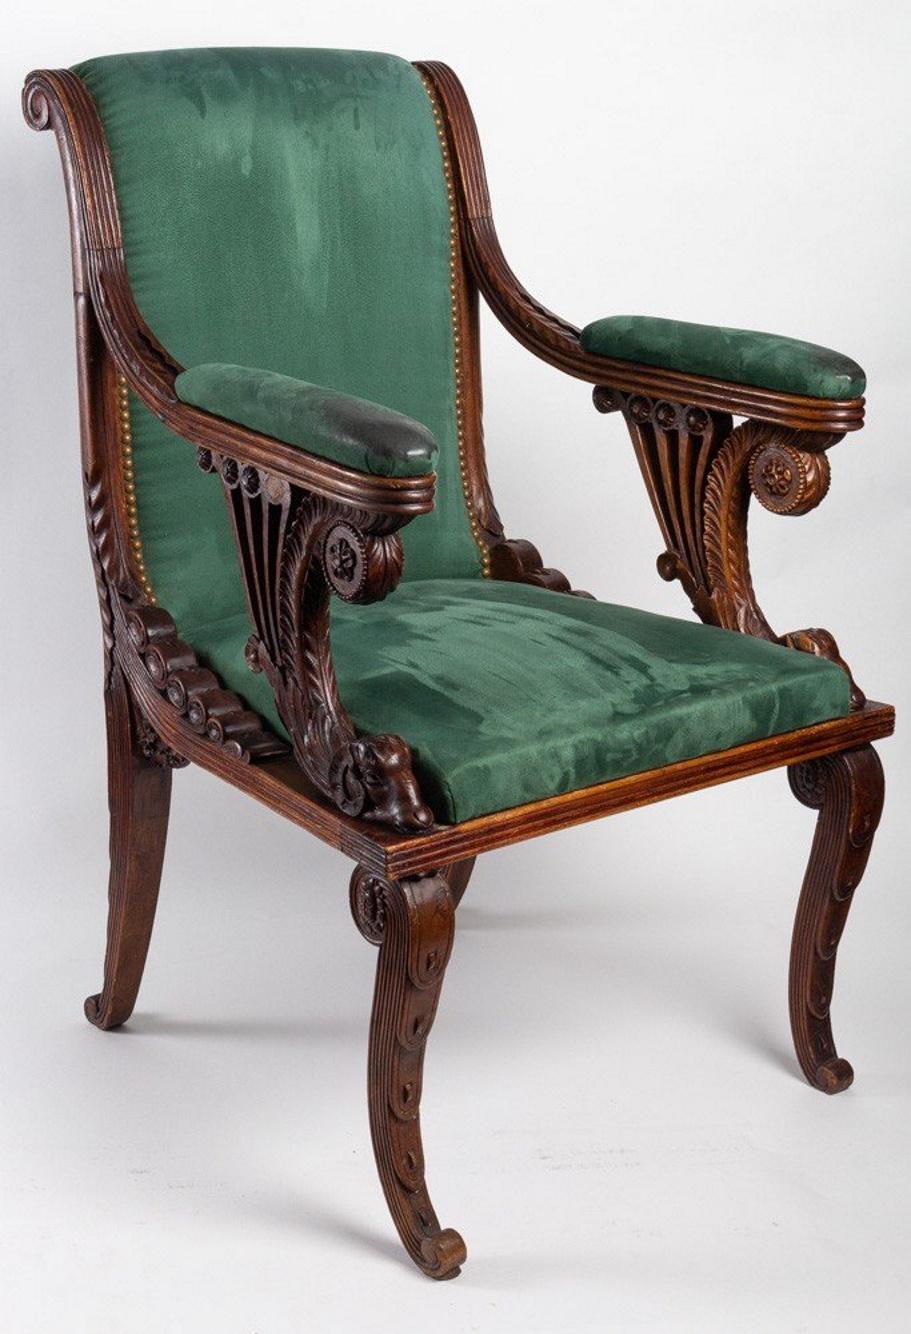 Carved wooden desk armchair 19th century
Period: 19th century
Style: Napoleon III
Measures: H: 93 cm, W: 60 cm, D: 54cm.